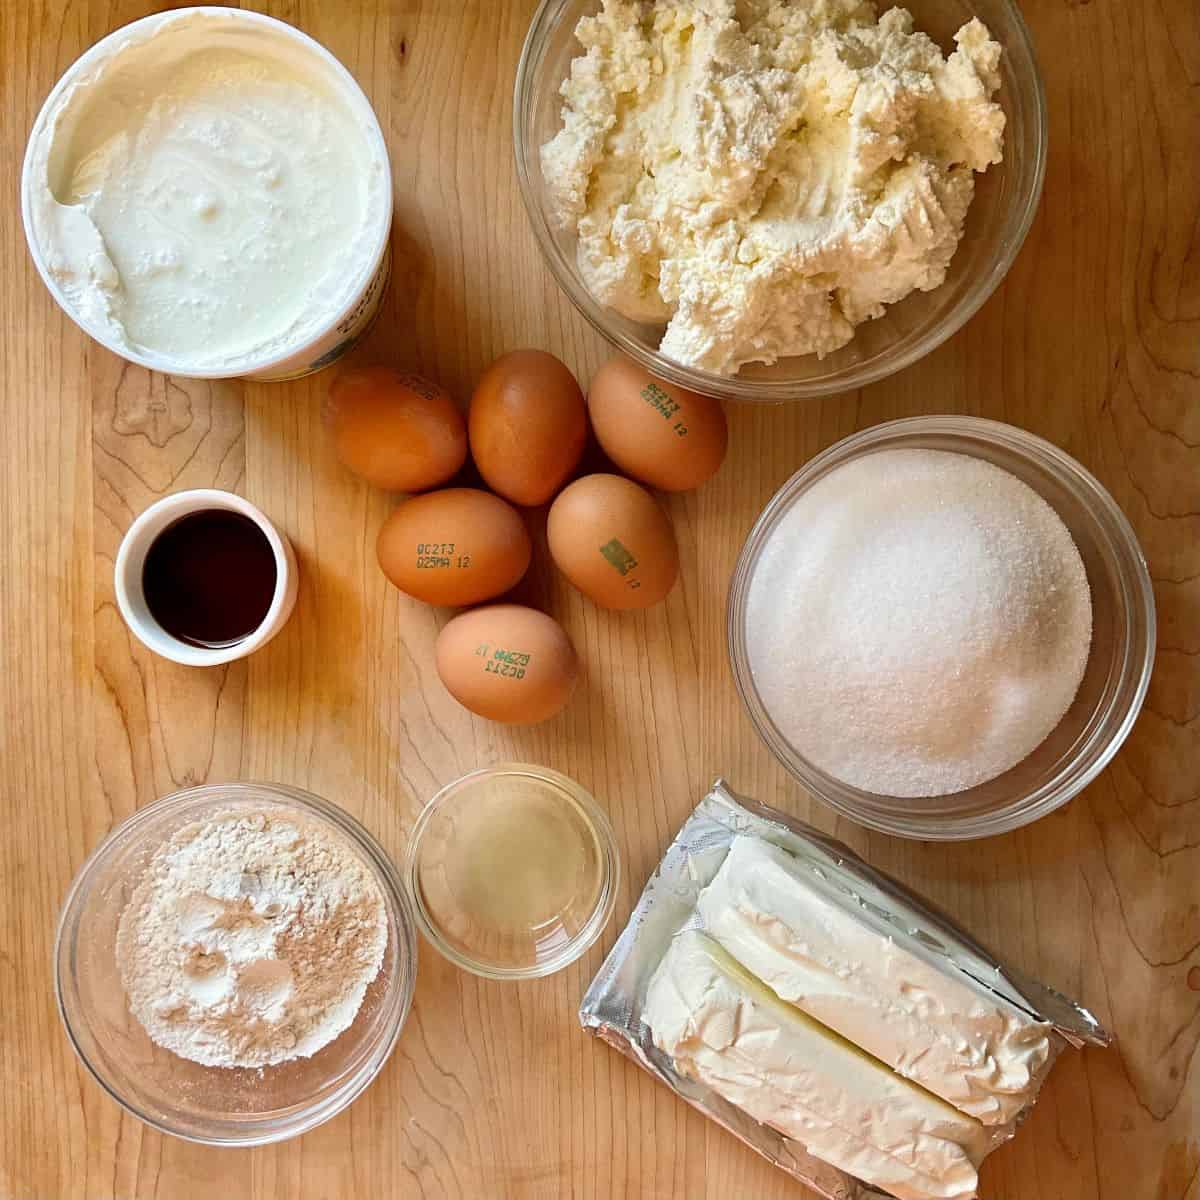 Ingredients to make an Italian cheesecake on a wooden board including ricotta and eggs.